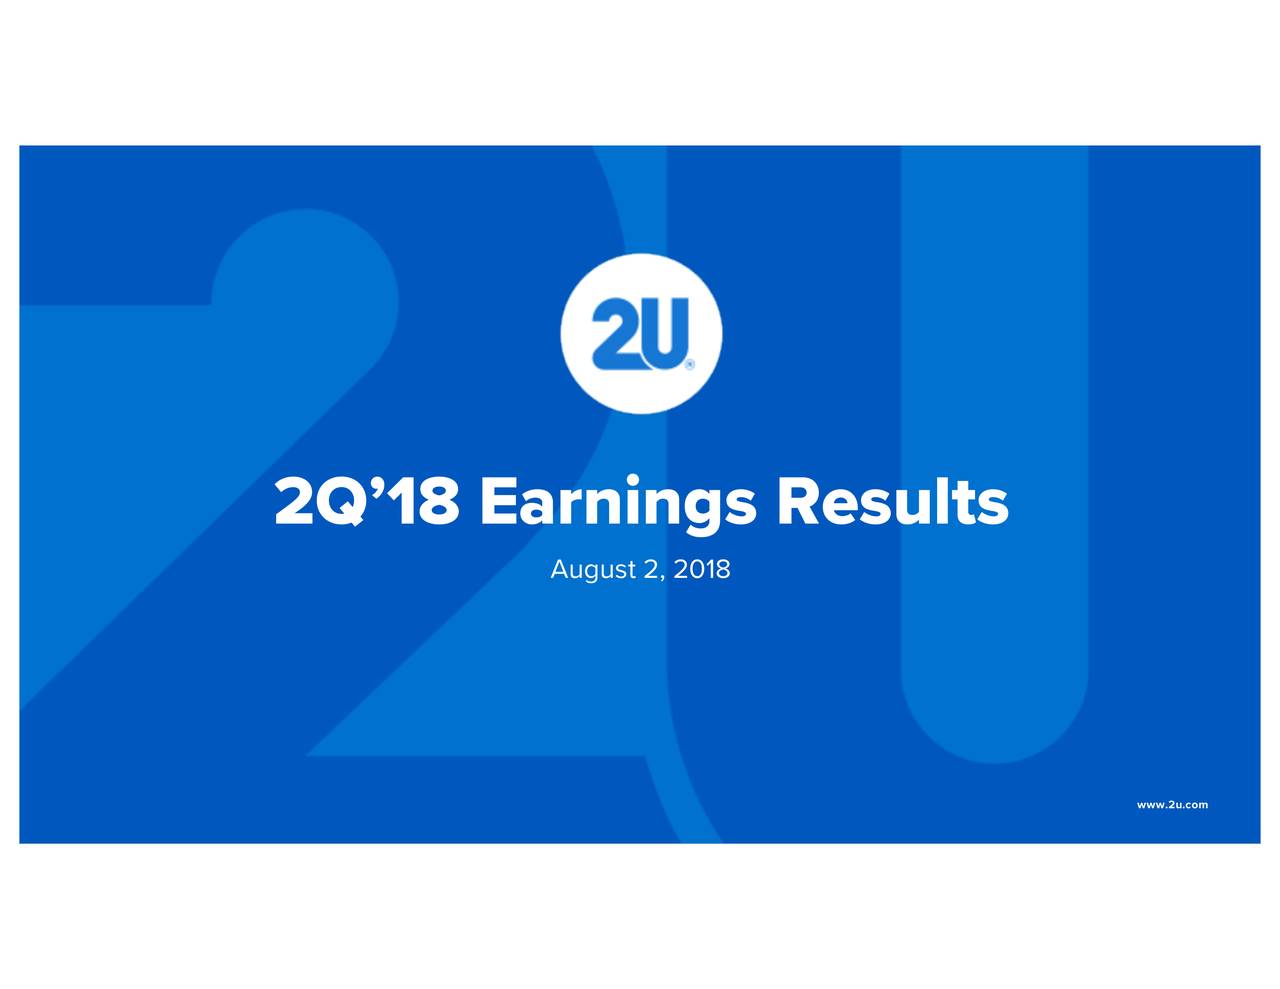 2Q’18 Earnings Results